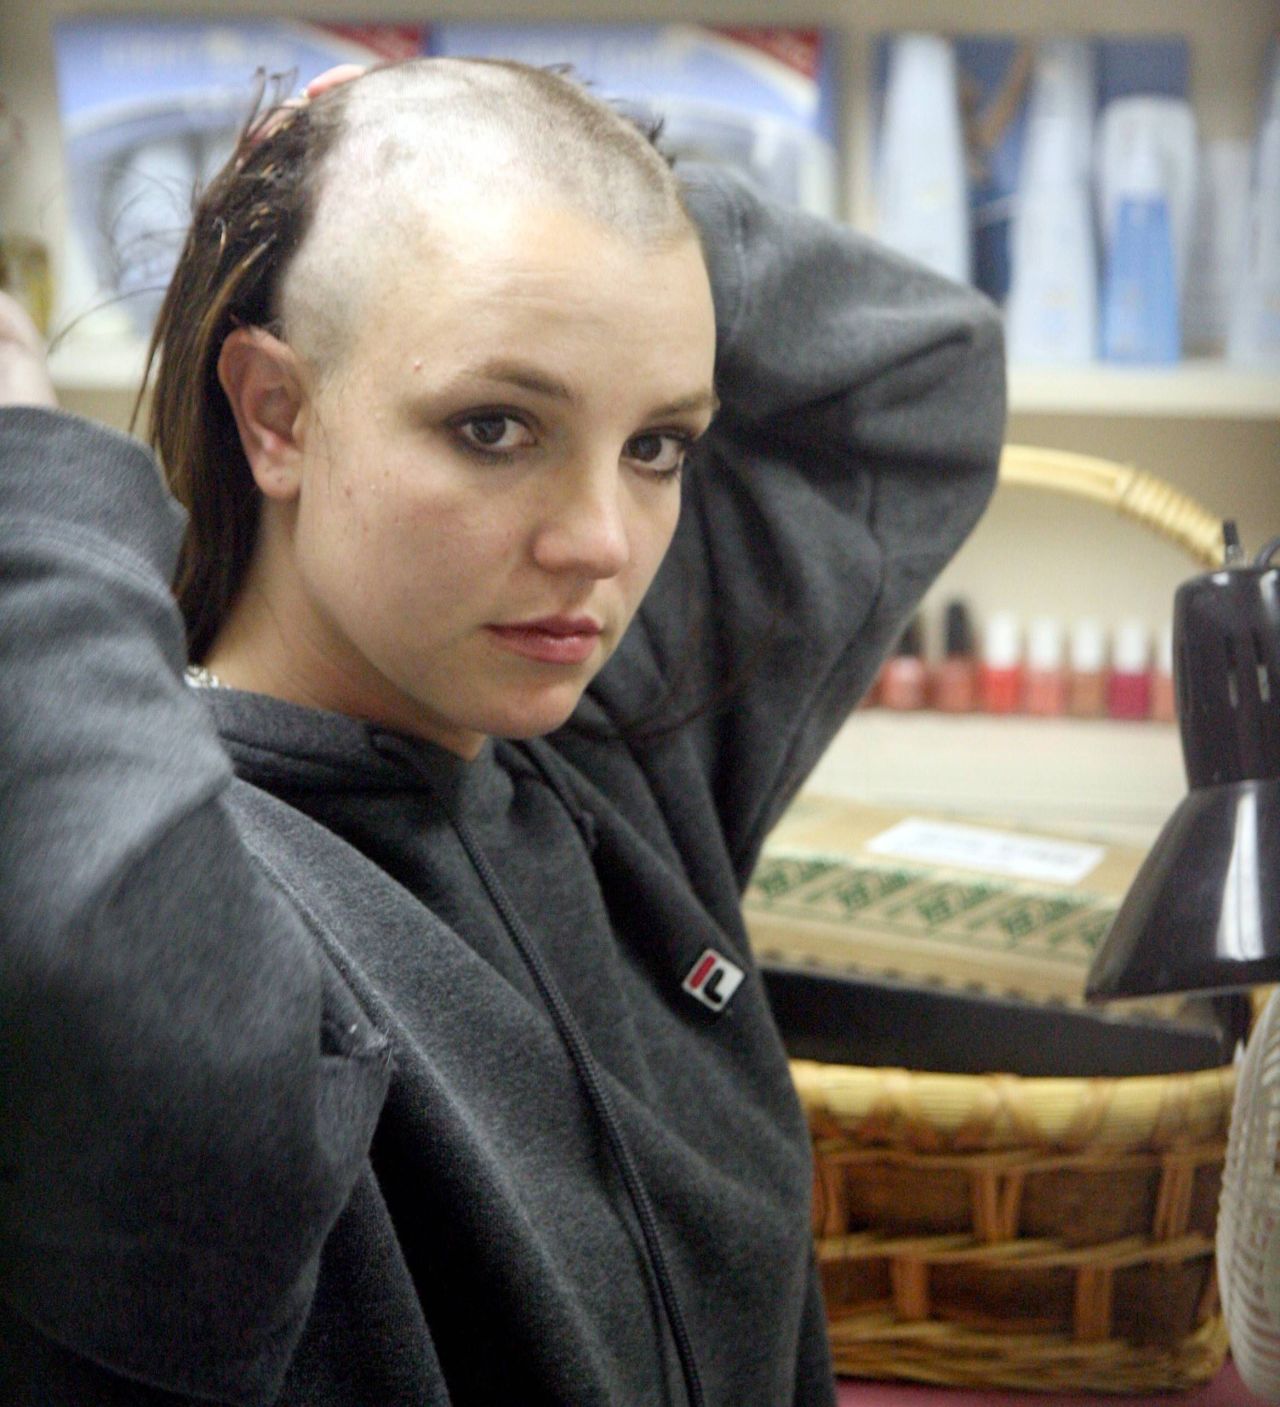 Britney Spears halfway through her infamous buzz cut in 2007.